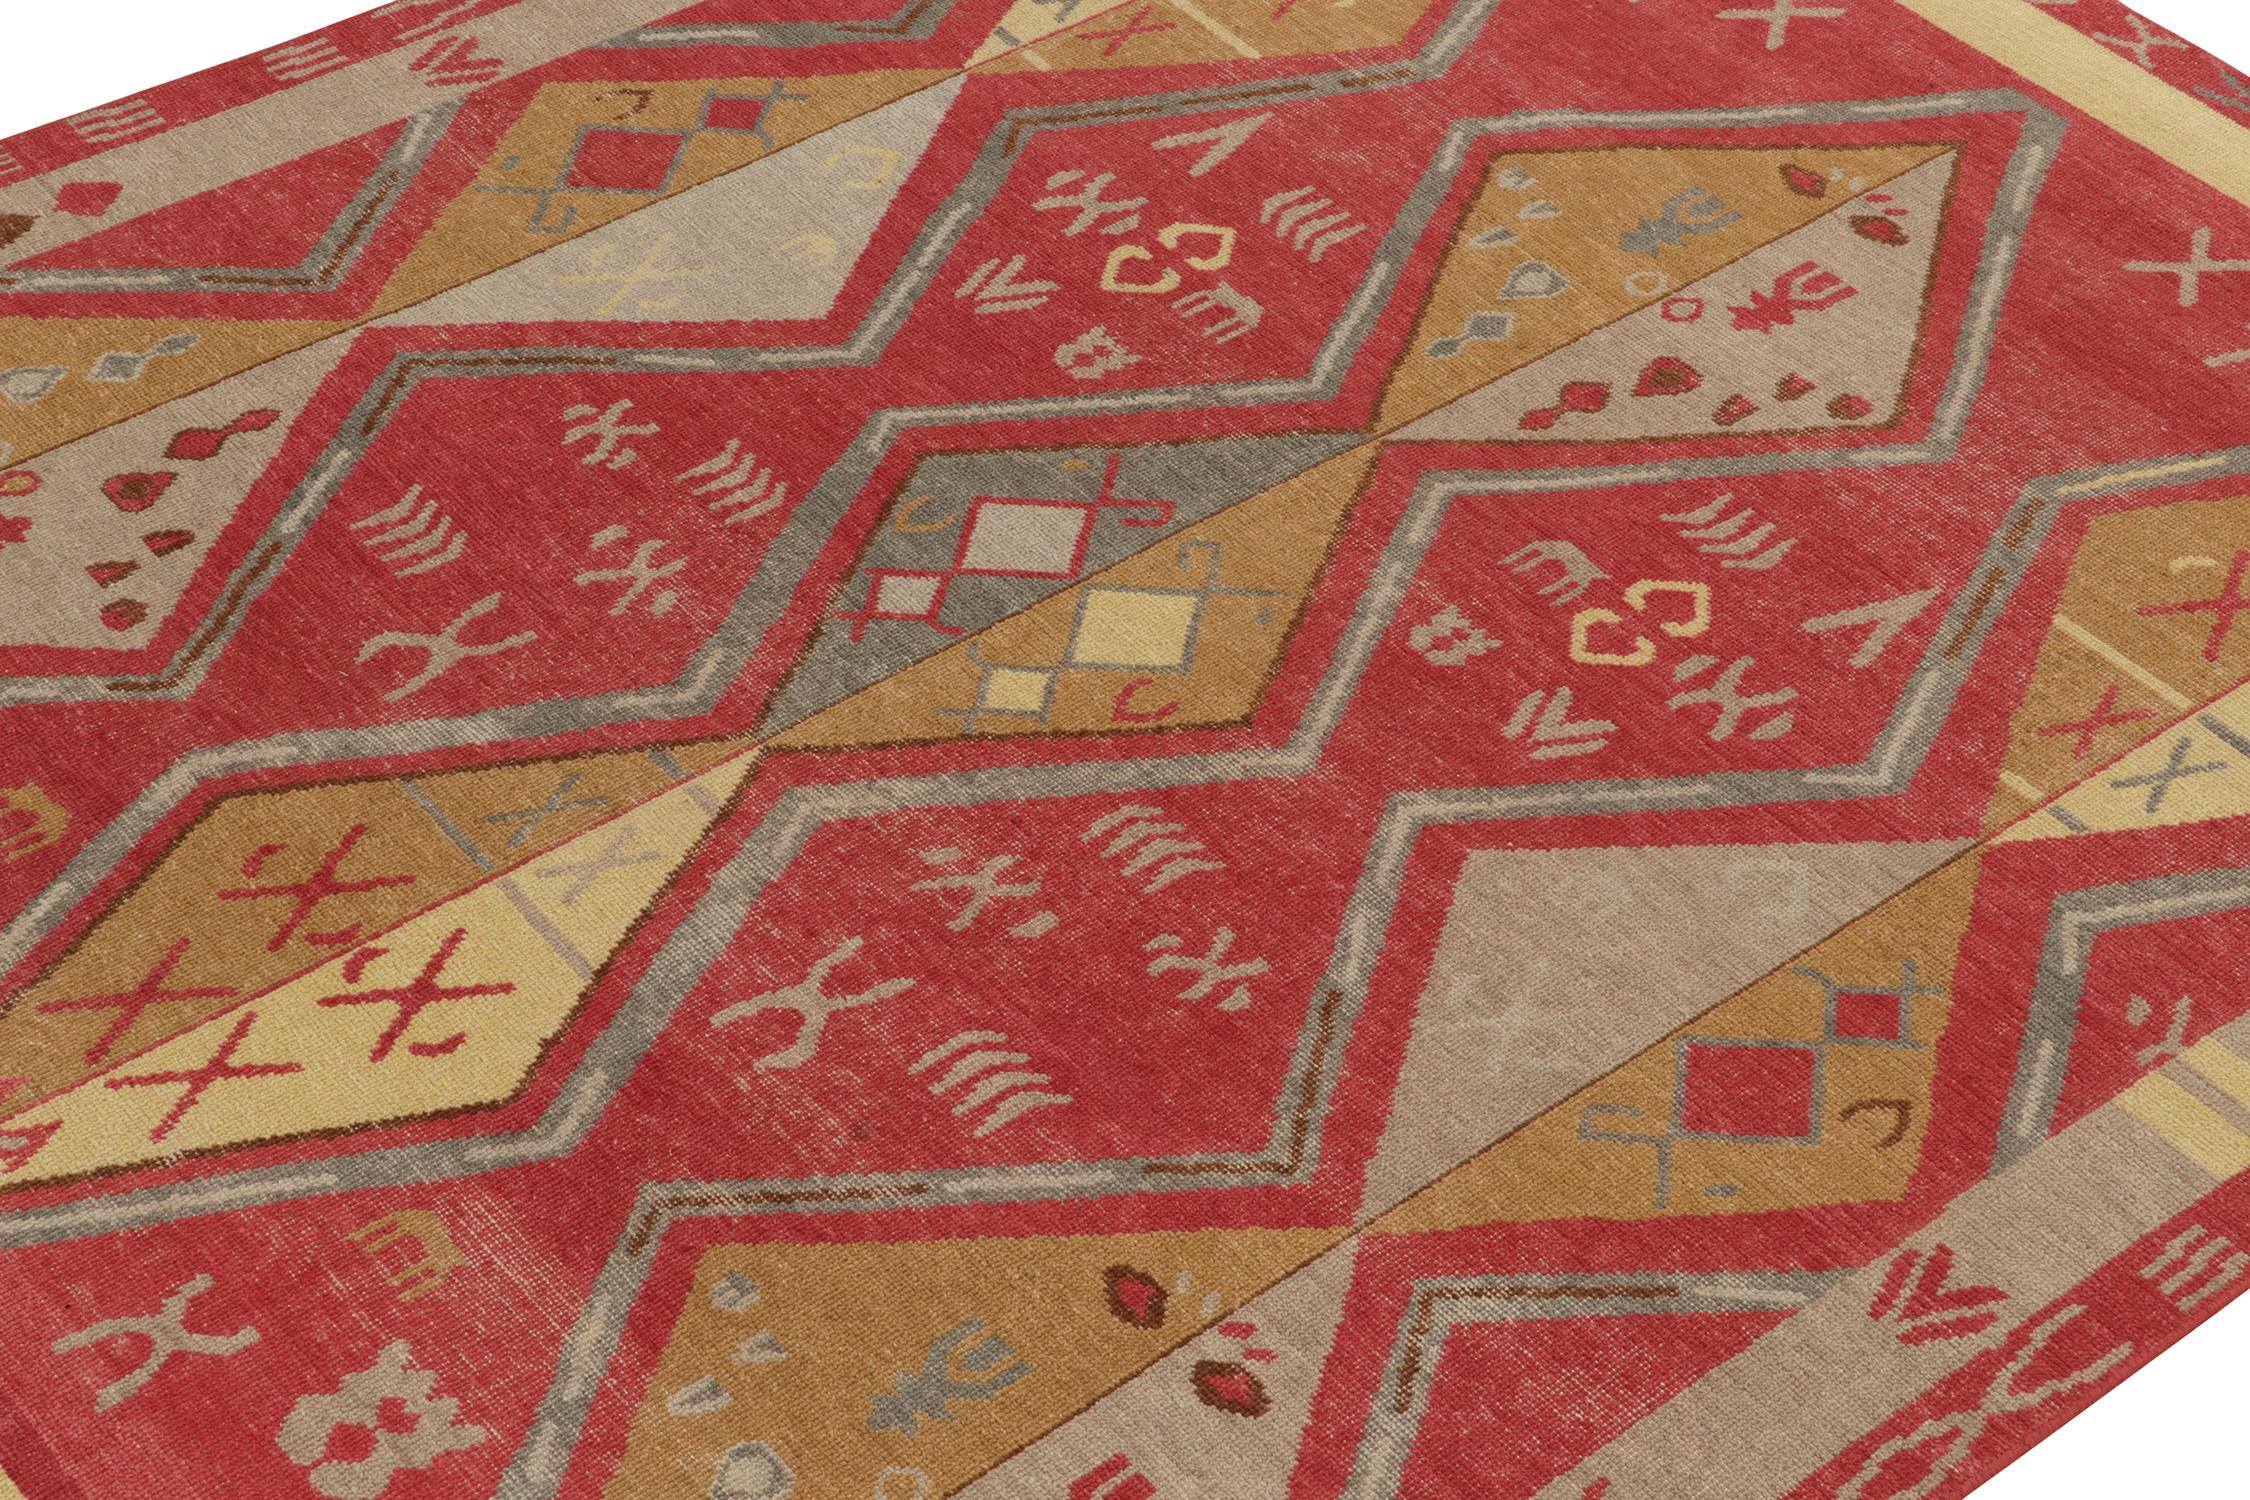 Indian Rug & Kilim’s Distressed Yuruk Style Rug in Red, Beige & Gray Geometric Patterns For Sale